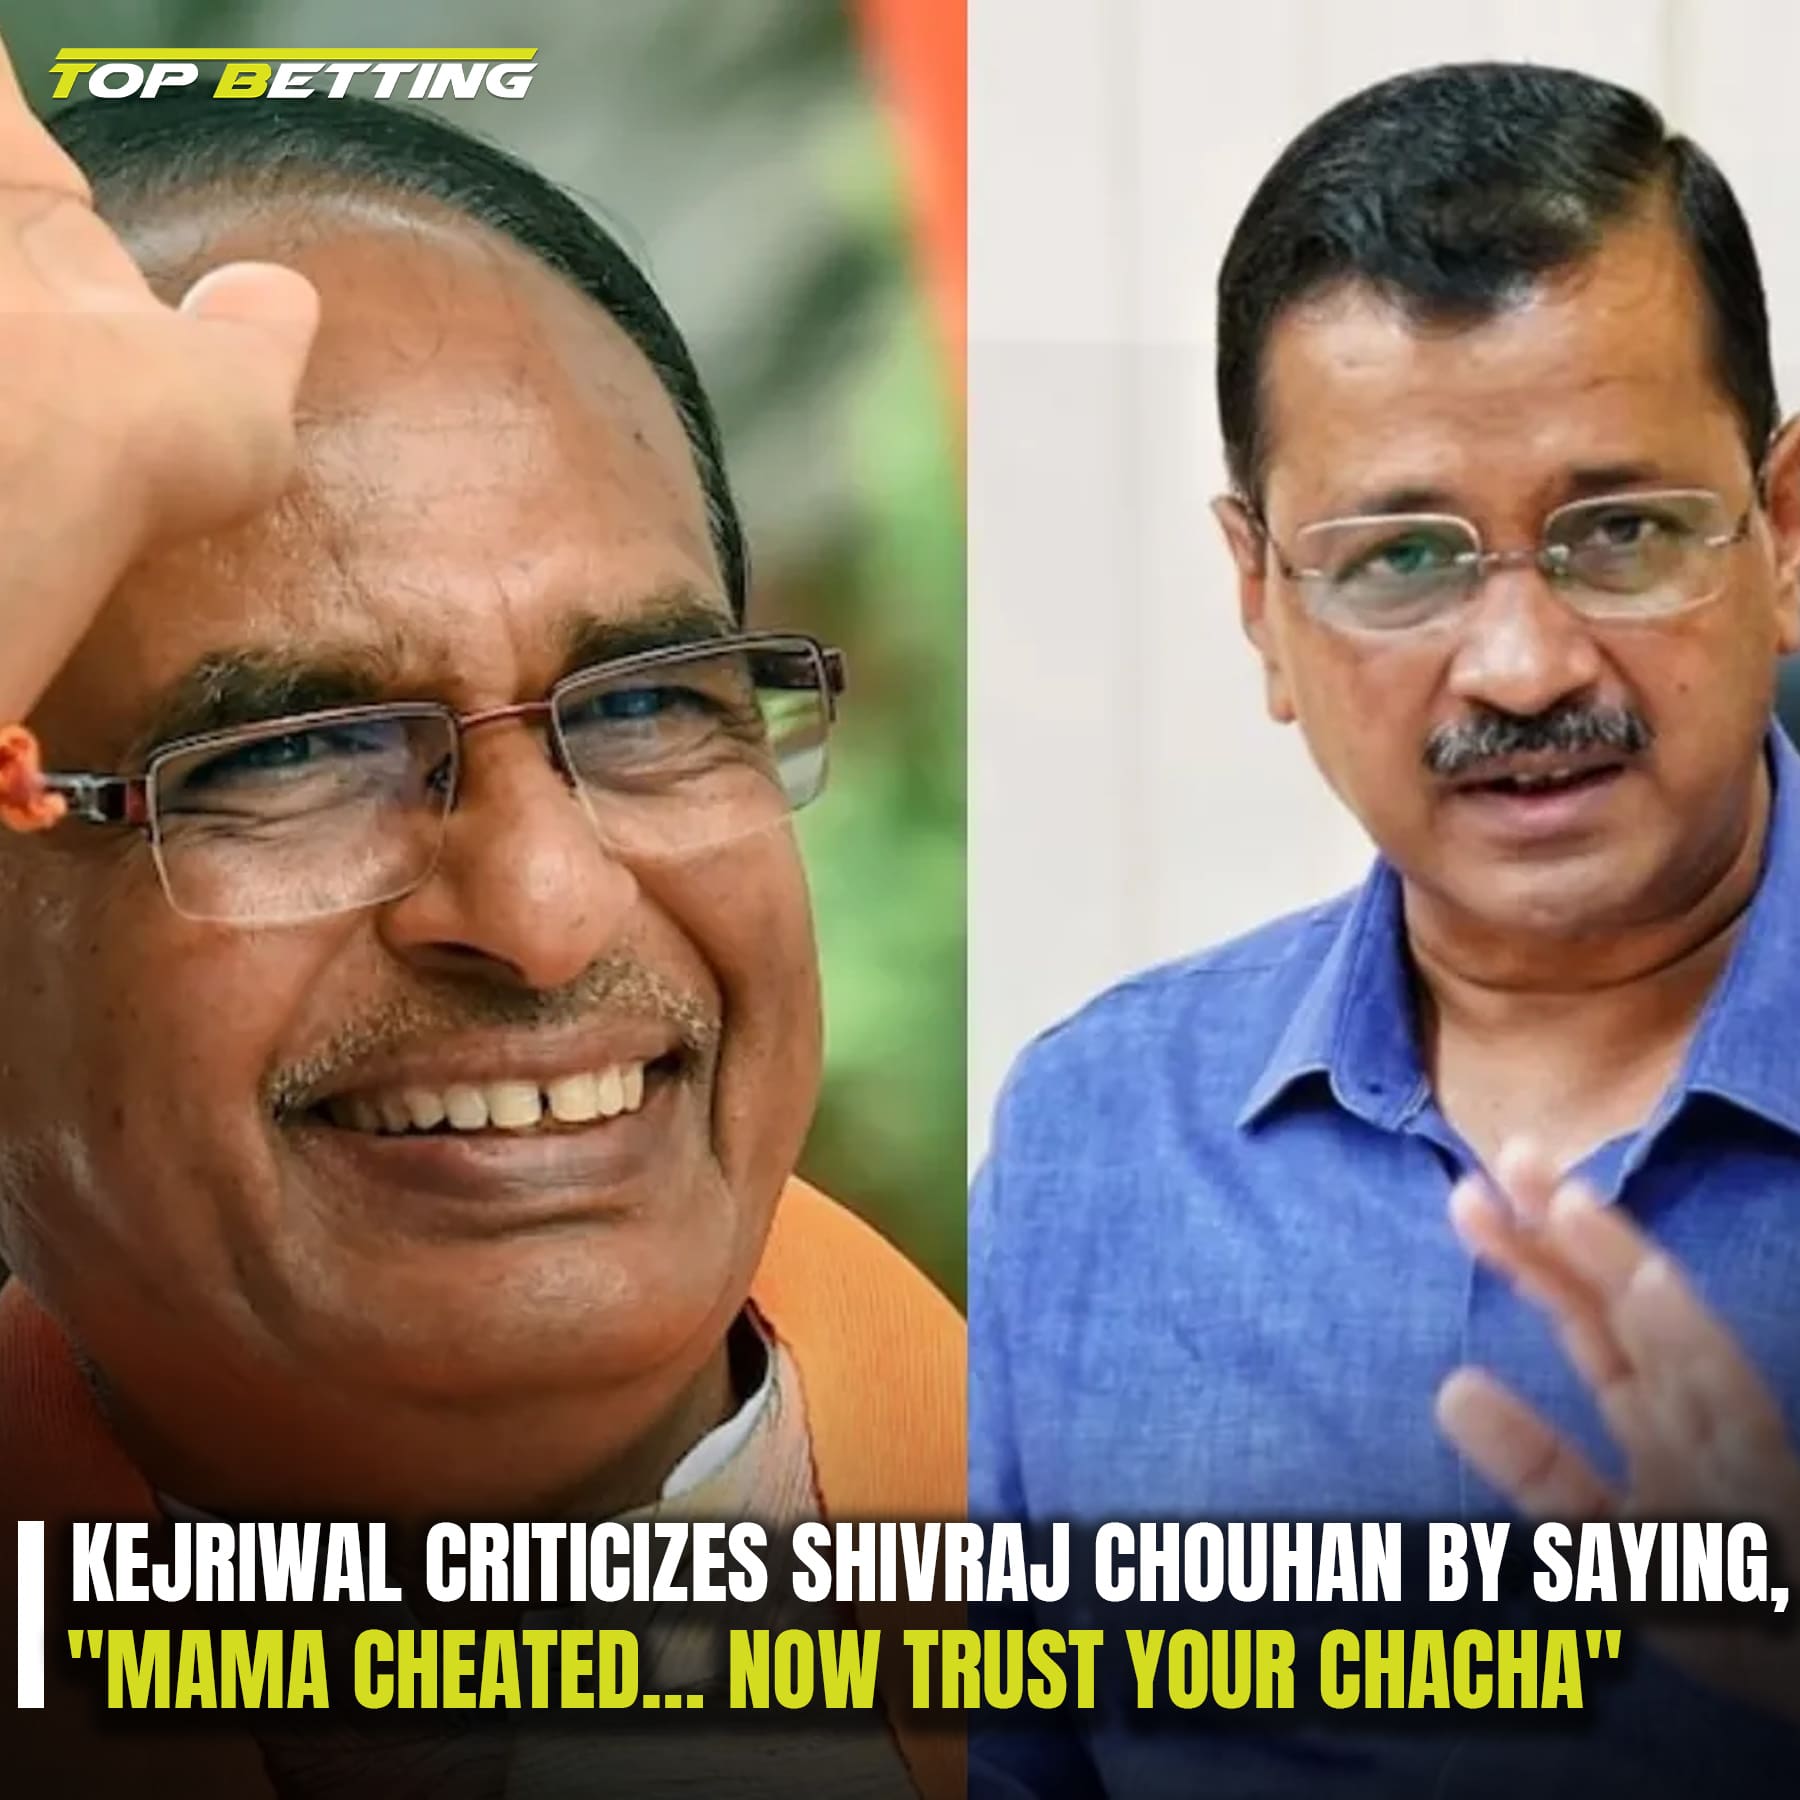 Kejriwal criticizes Shivraj Chouhan by saying, “Mama cheated… now trust your chacha”